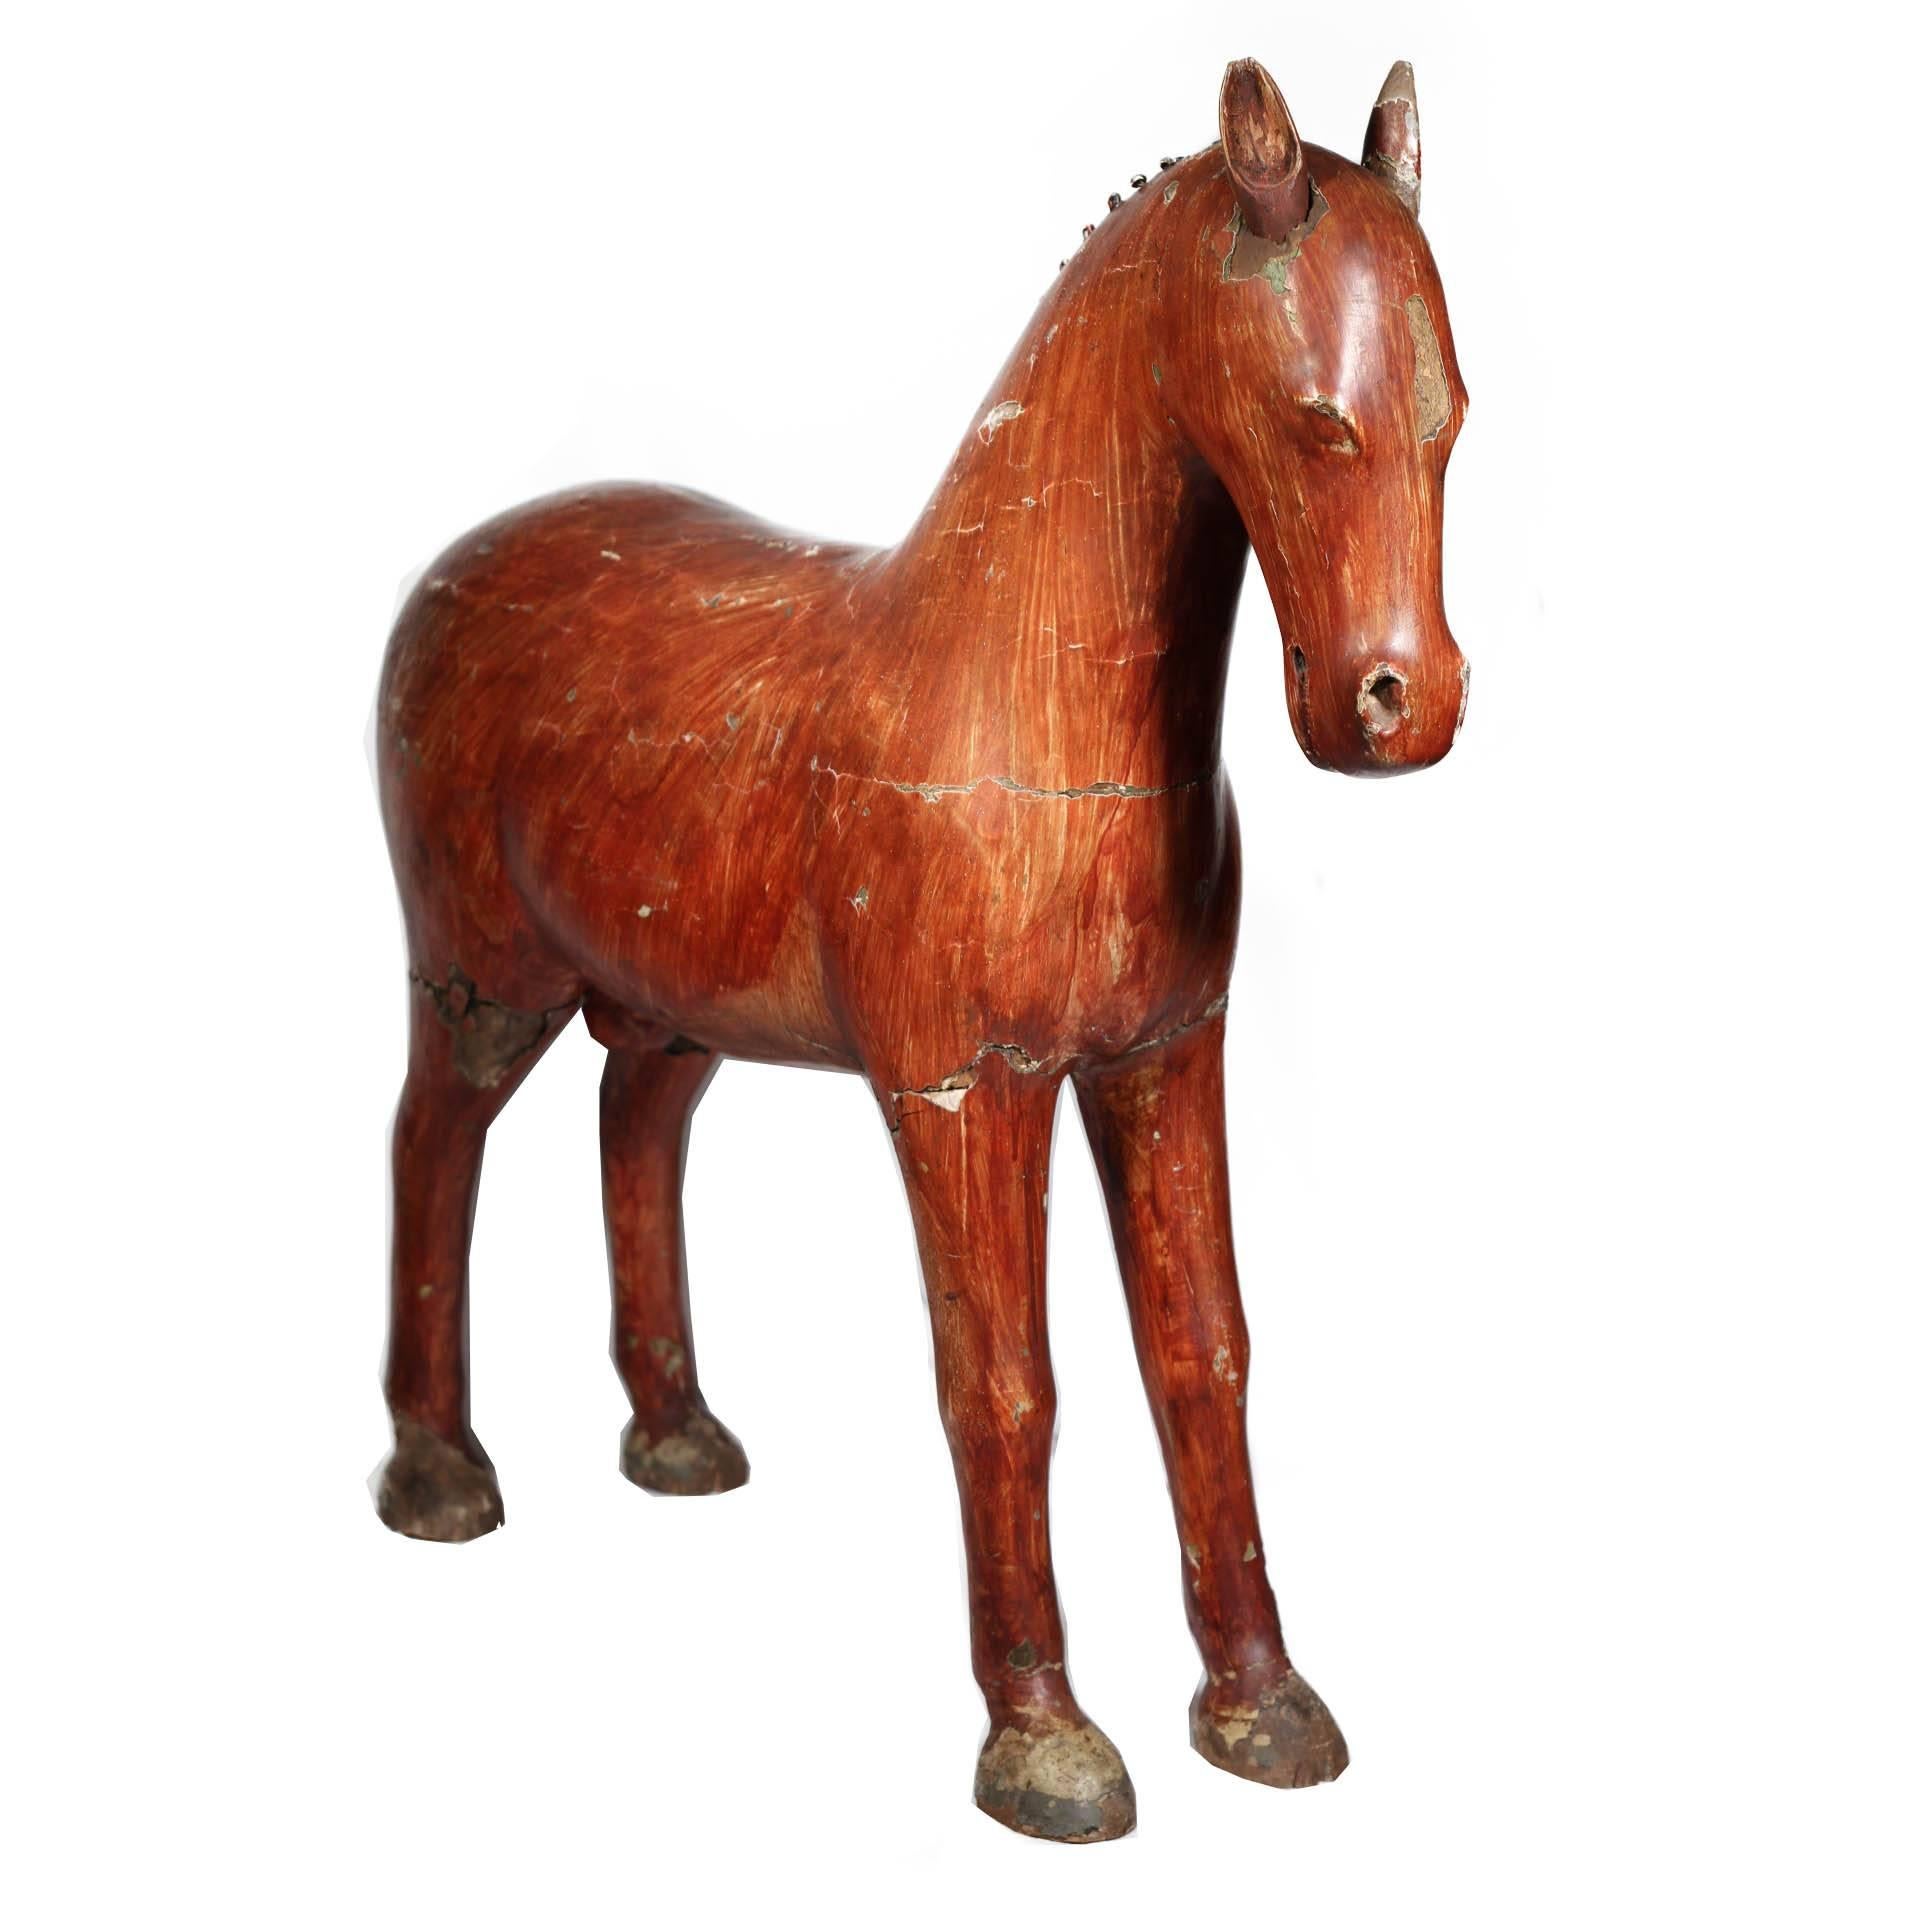 19th century painted wooden figure of a horse, circa 1800s. Possibly British.